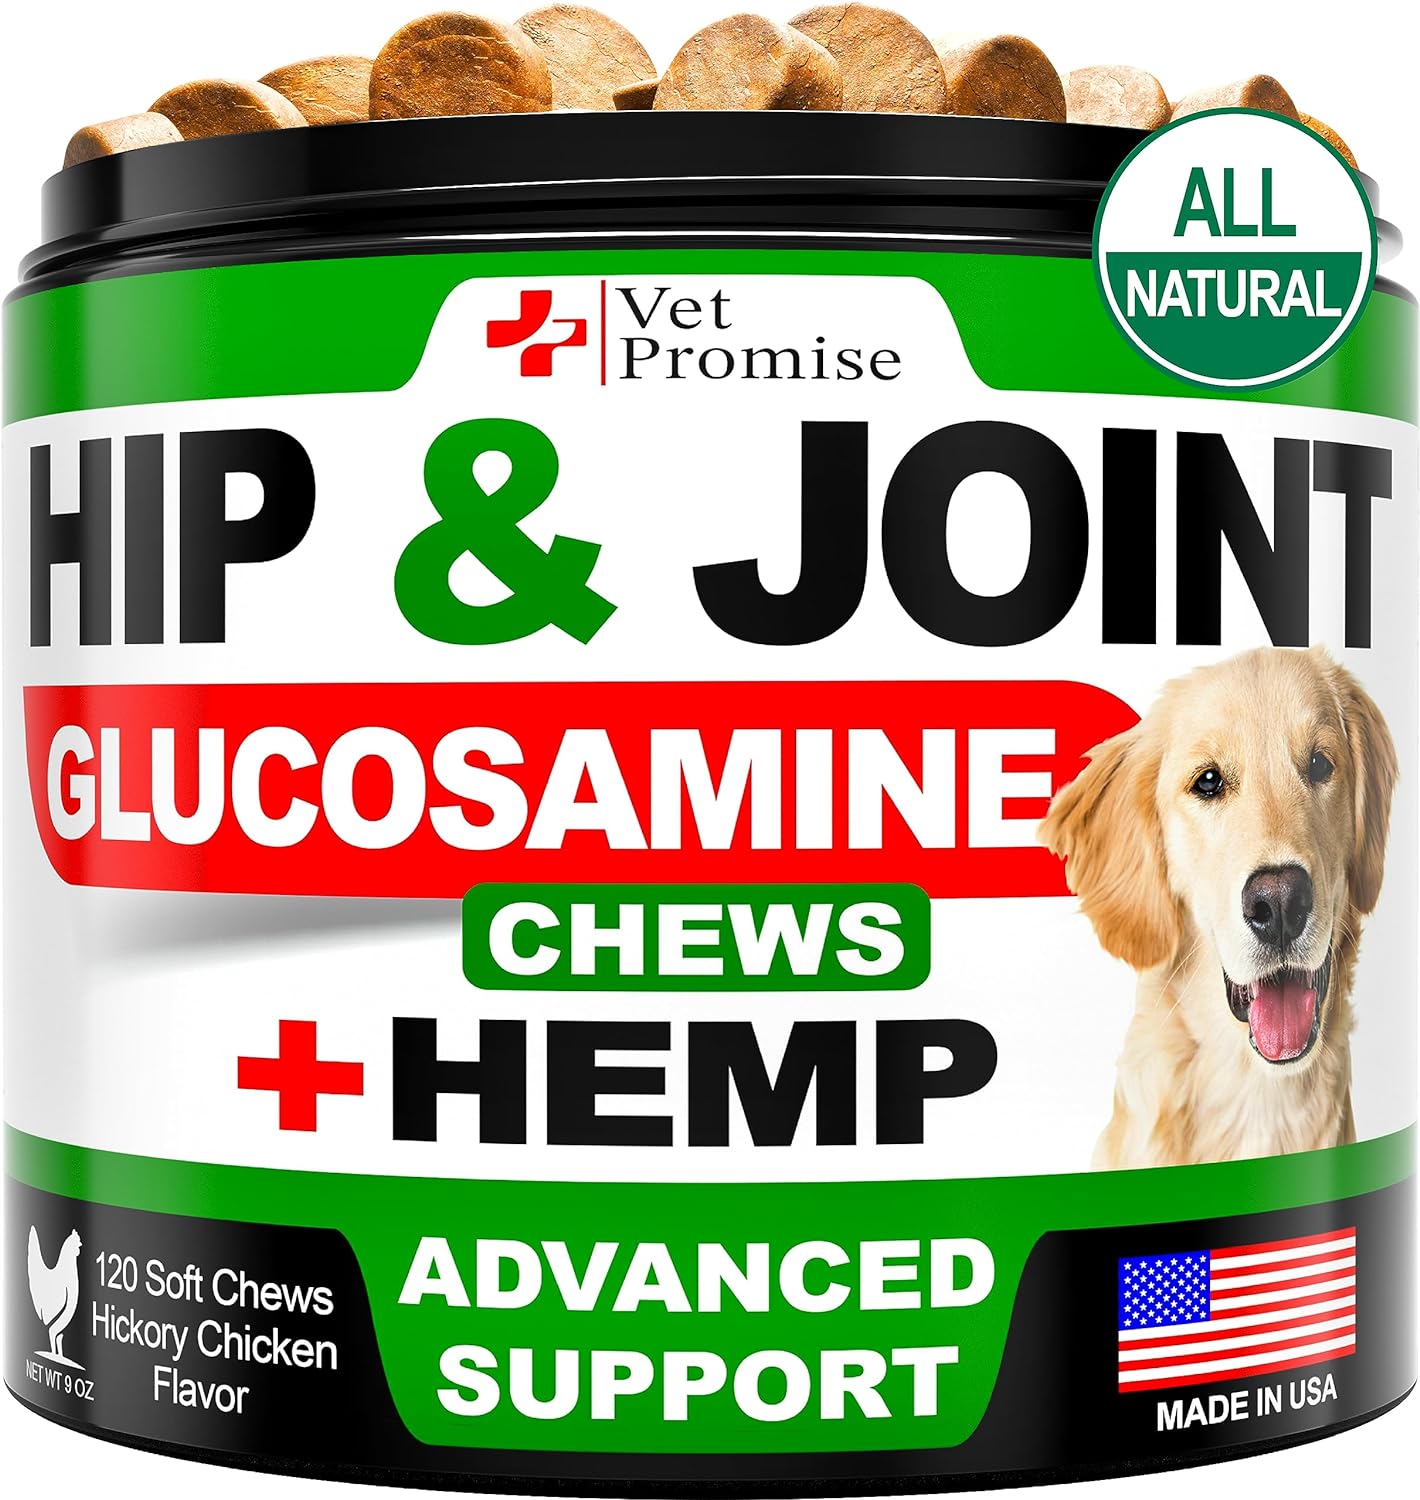 Hemp Hip and Joint Support Supplement for Dogs - Glucosamine for Dogs - Dog Joint Supplement - Hip and Joint Chews for Dogs with Chondroitin - MSM - Hemp Oil - Hemp Chews For Dogs - Dog Pain Relief